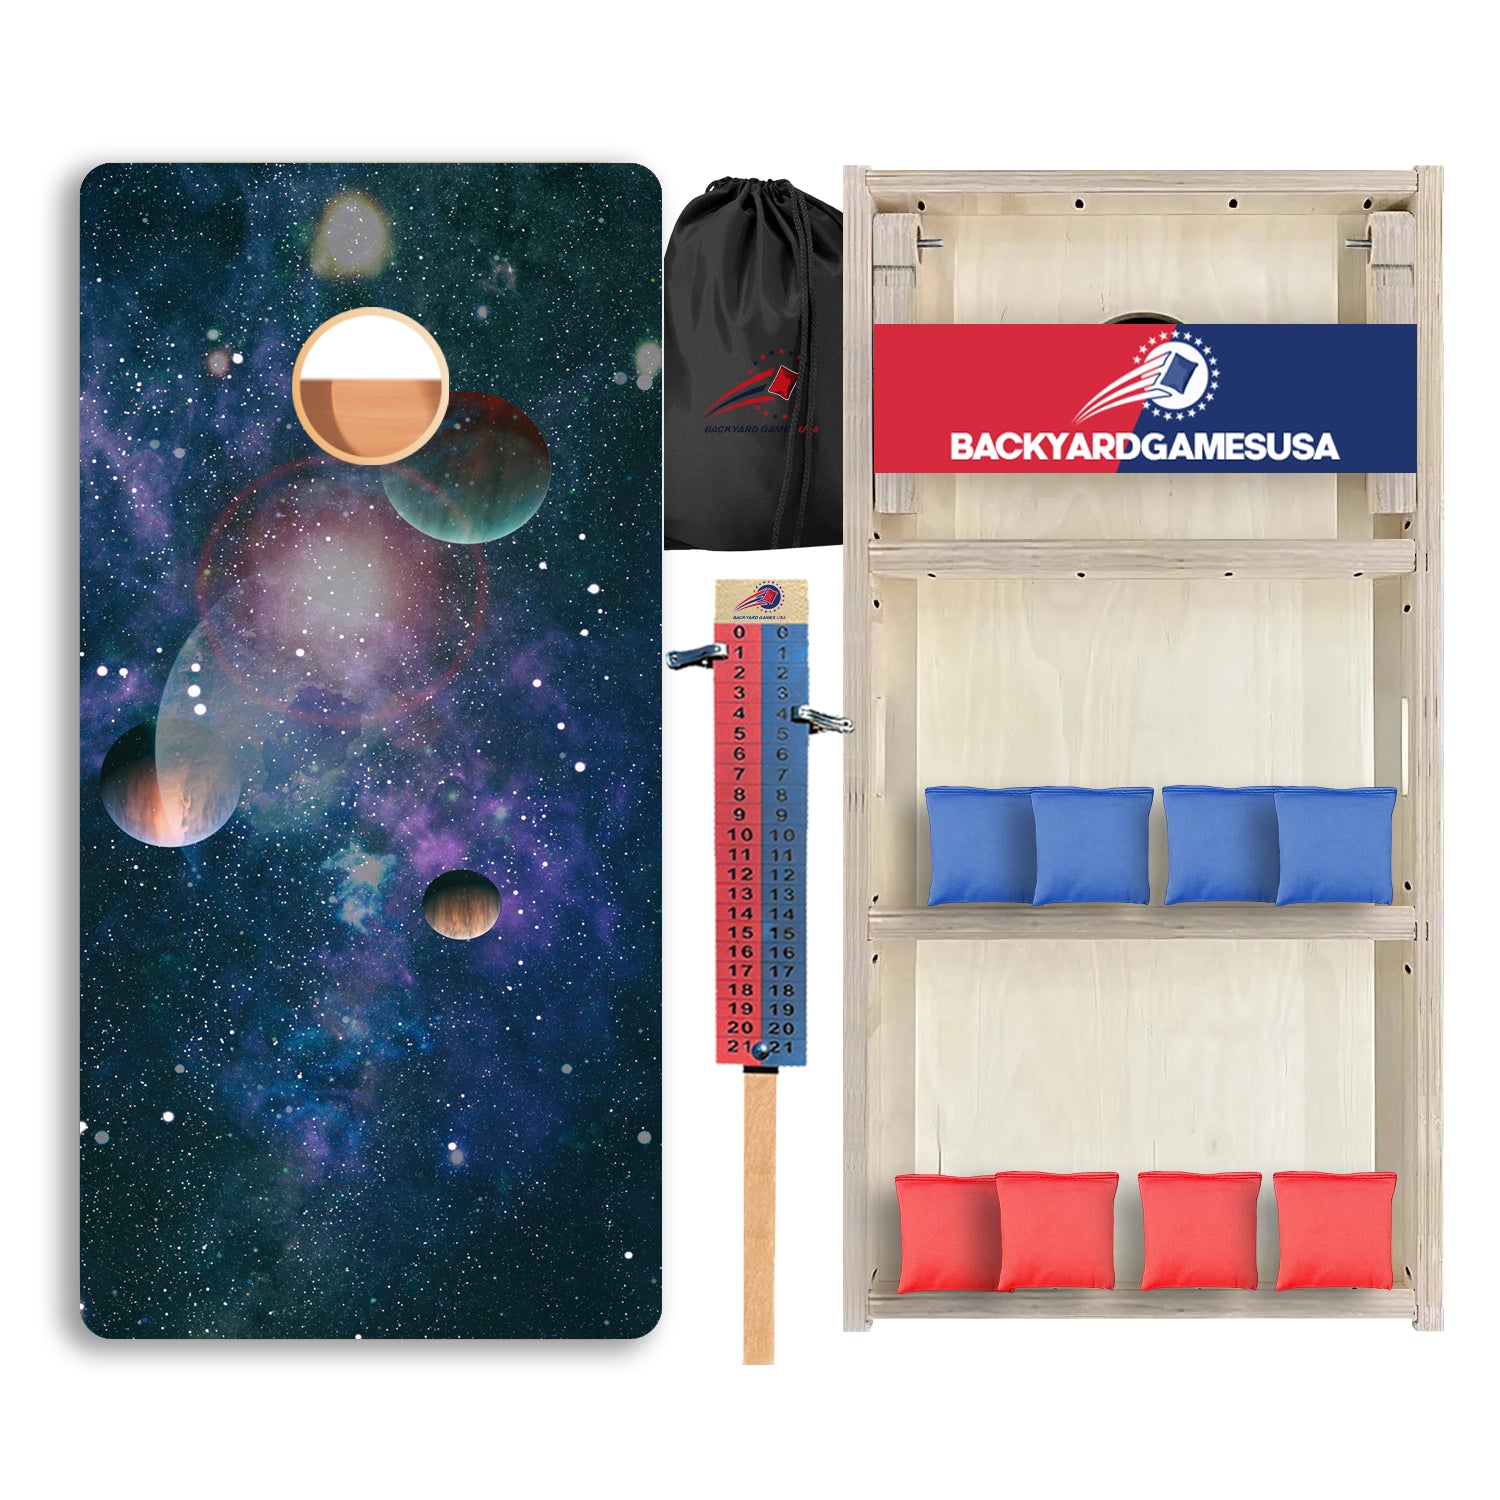 Planets in Space Professional Cornhole Boards